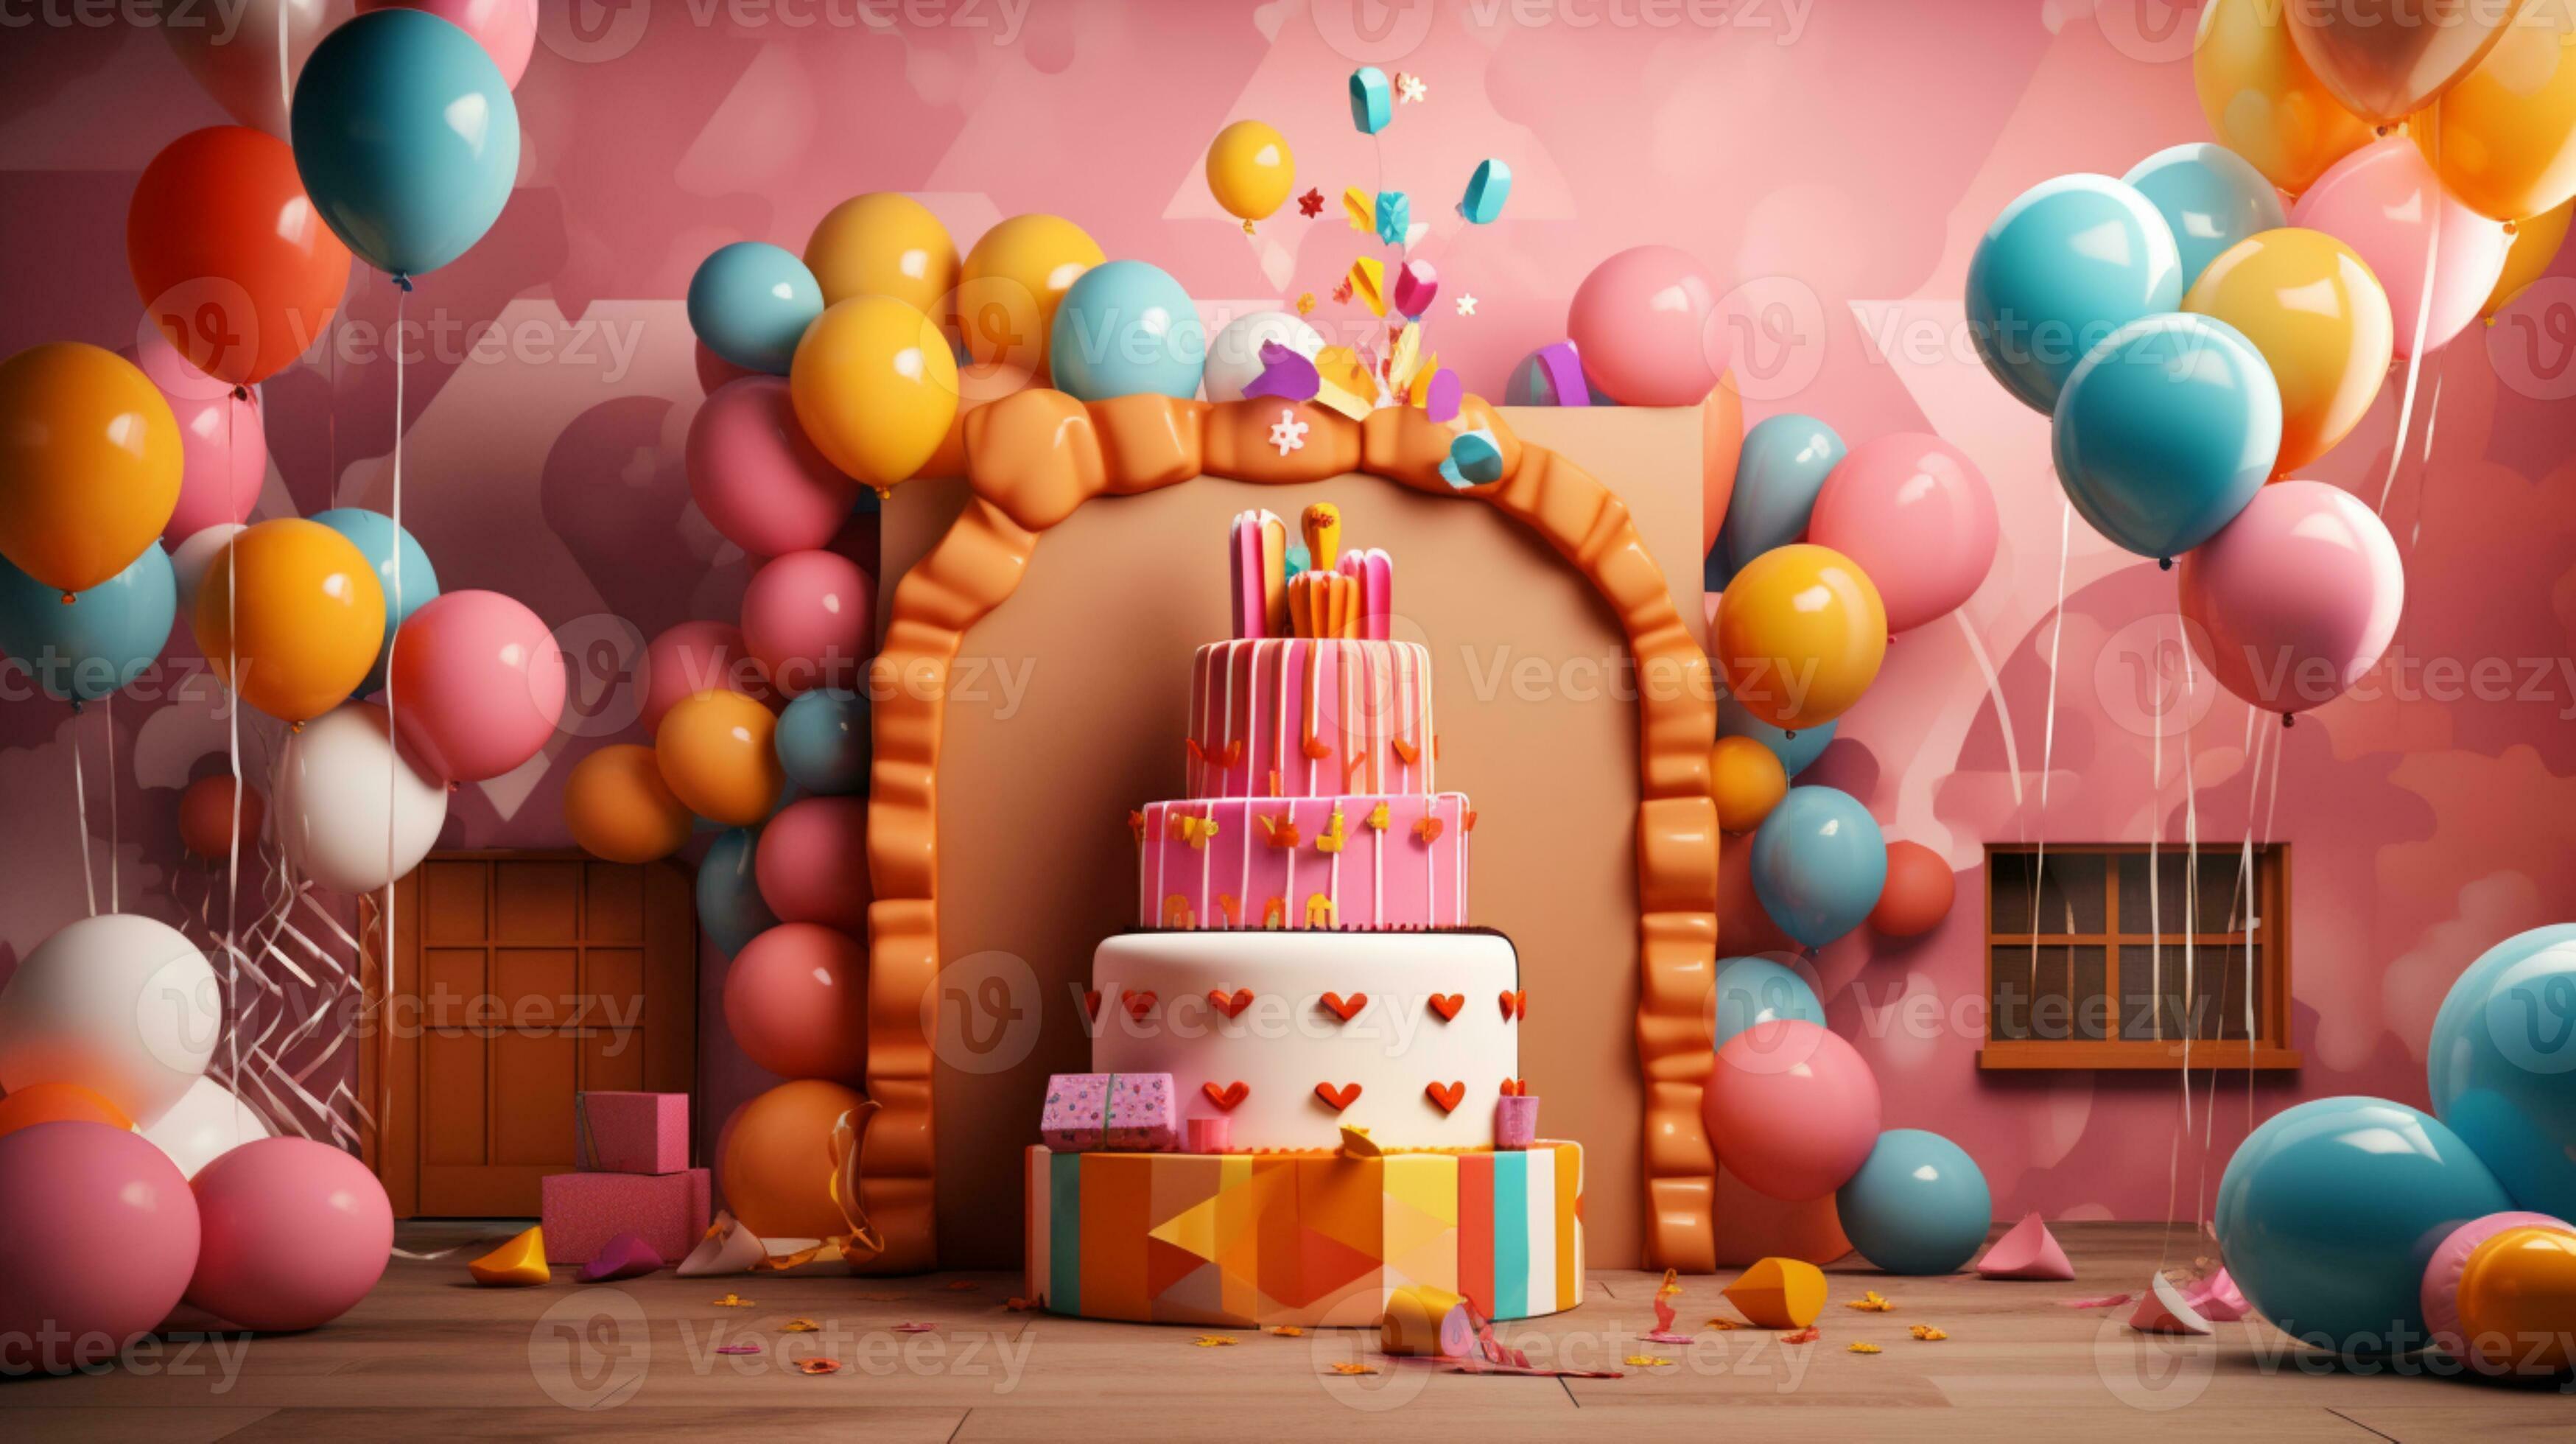 birthday-cake-template-pink-color-3d-design-26118794-stock-photo-at